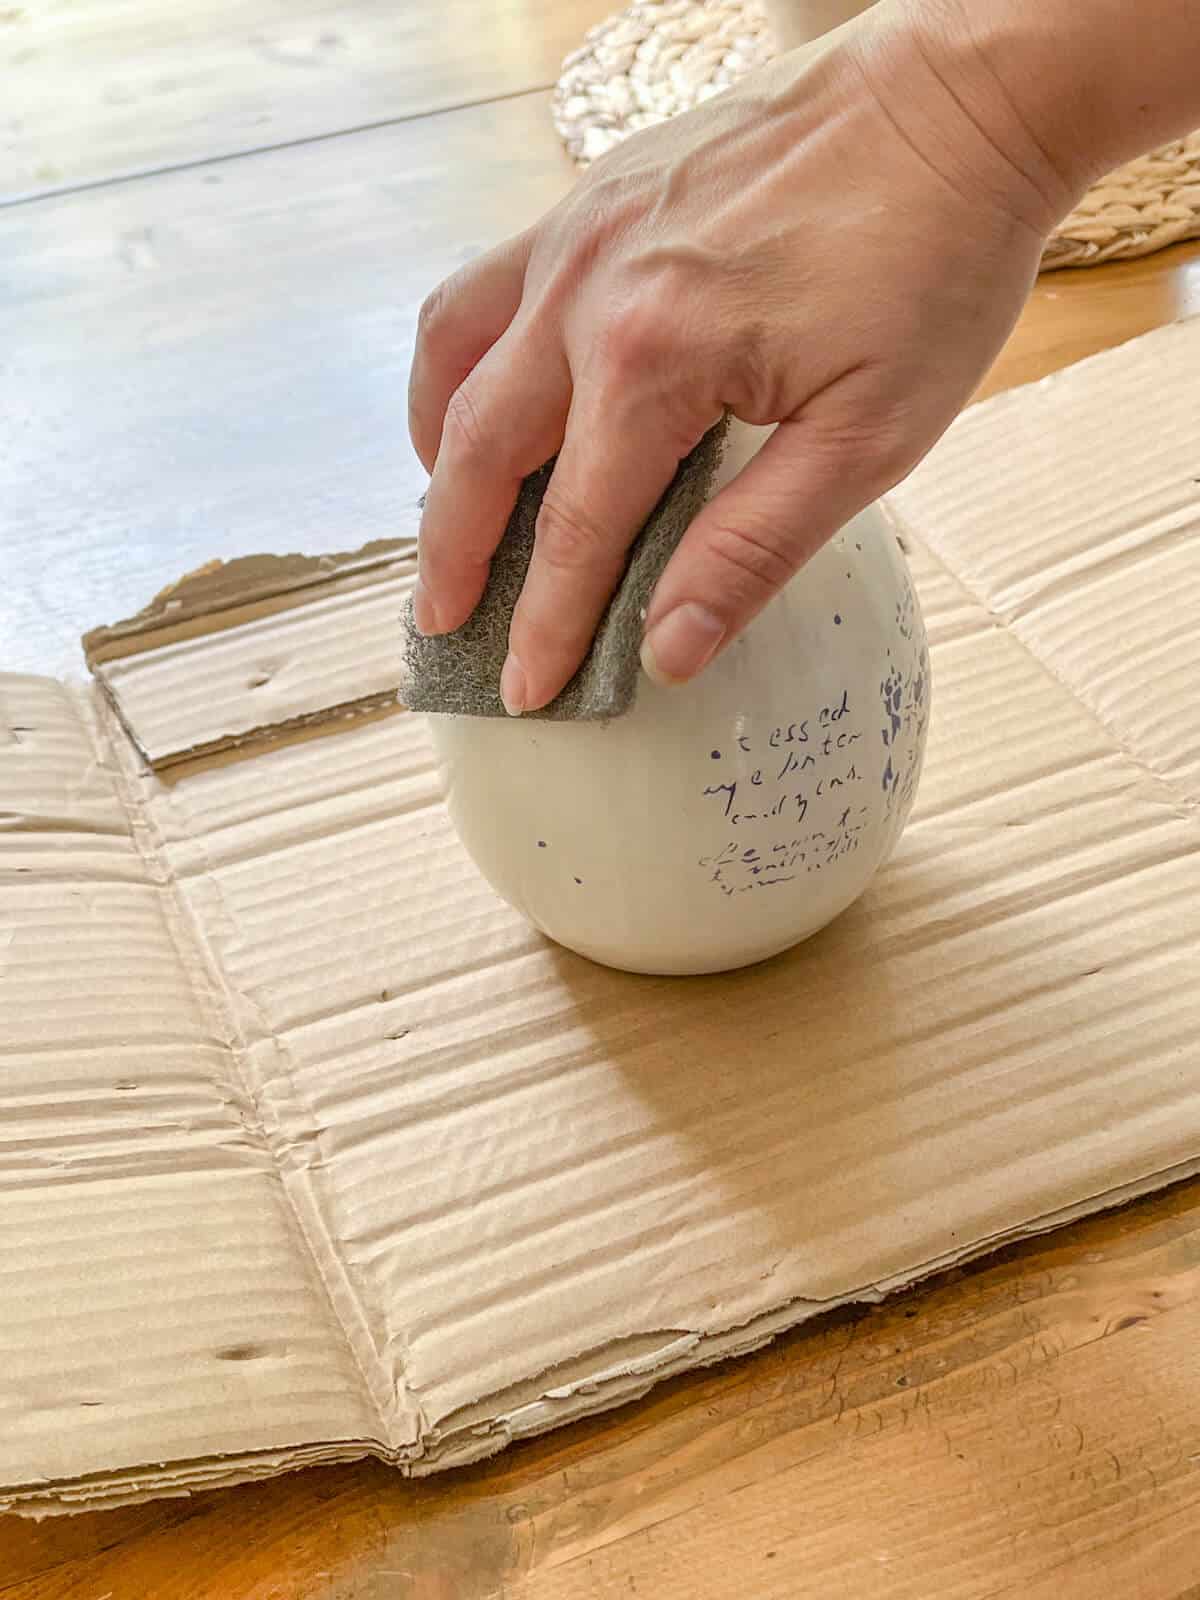 scuffing a clearance vase to prepare for painting